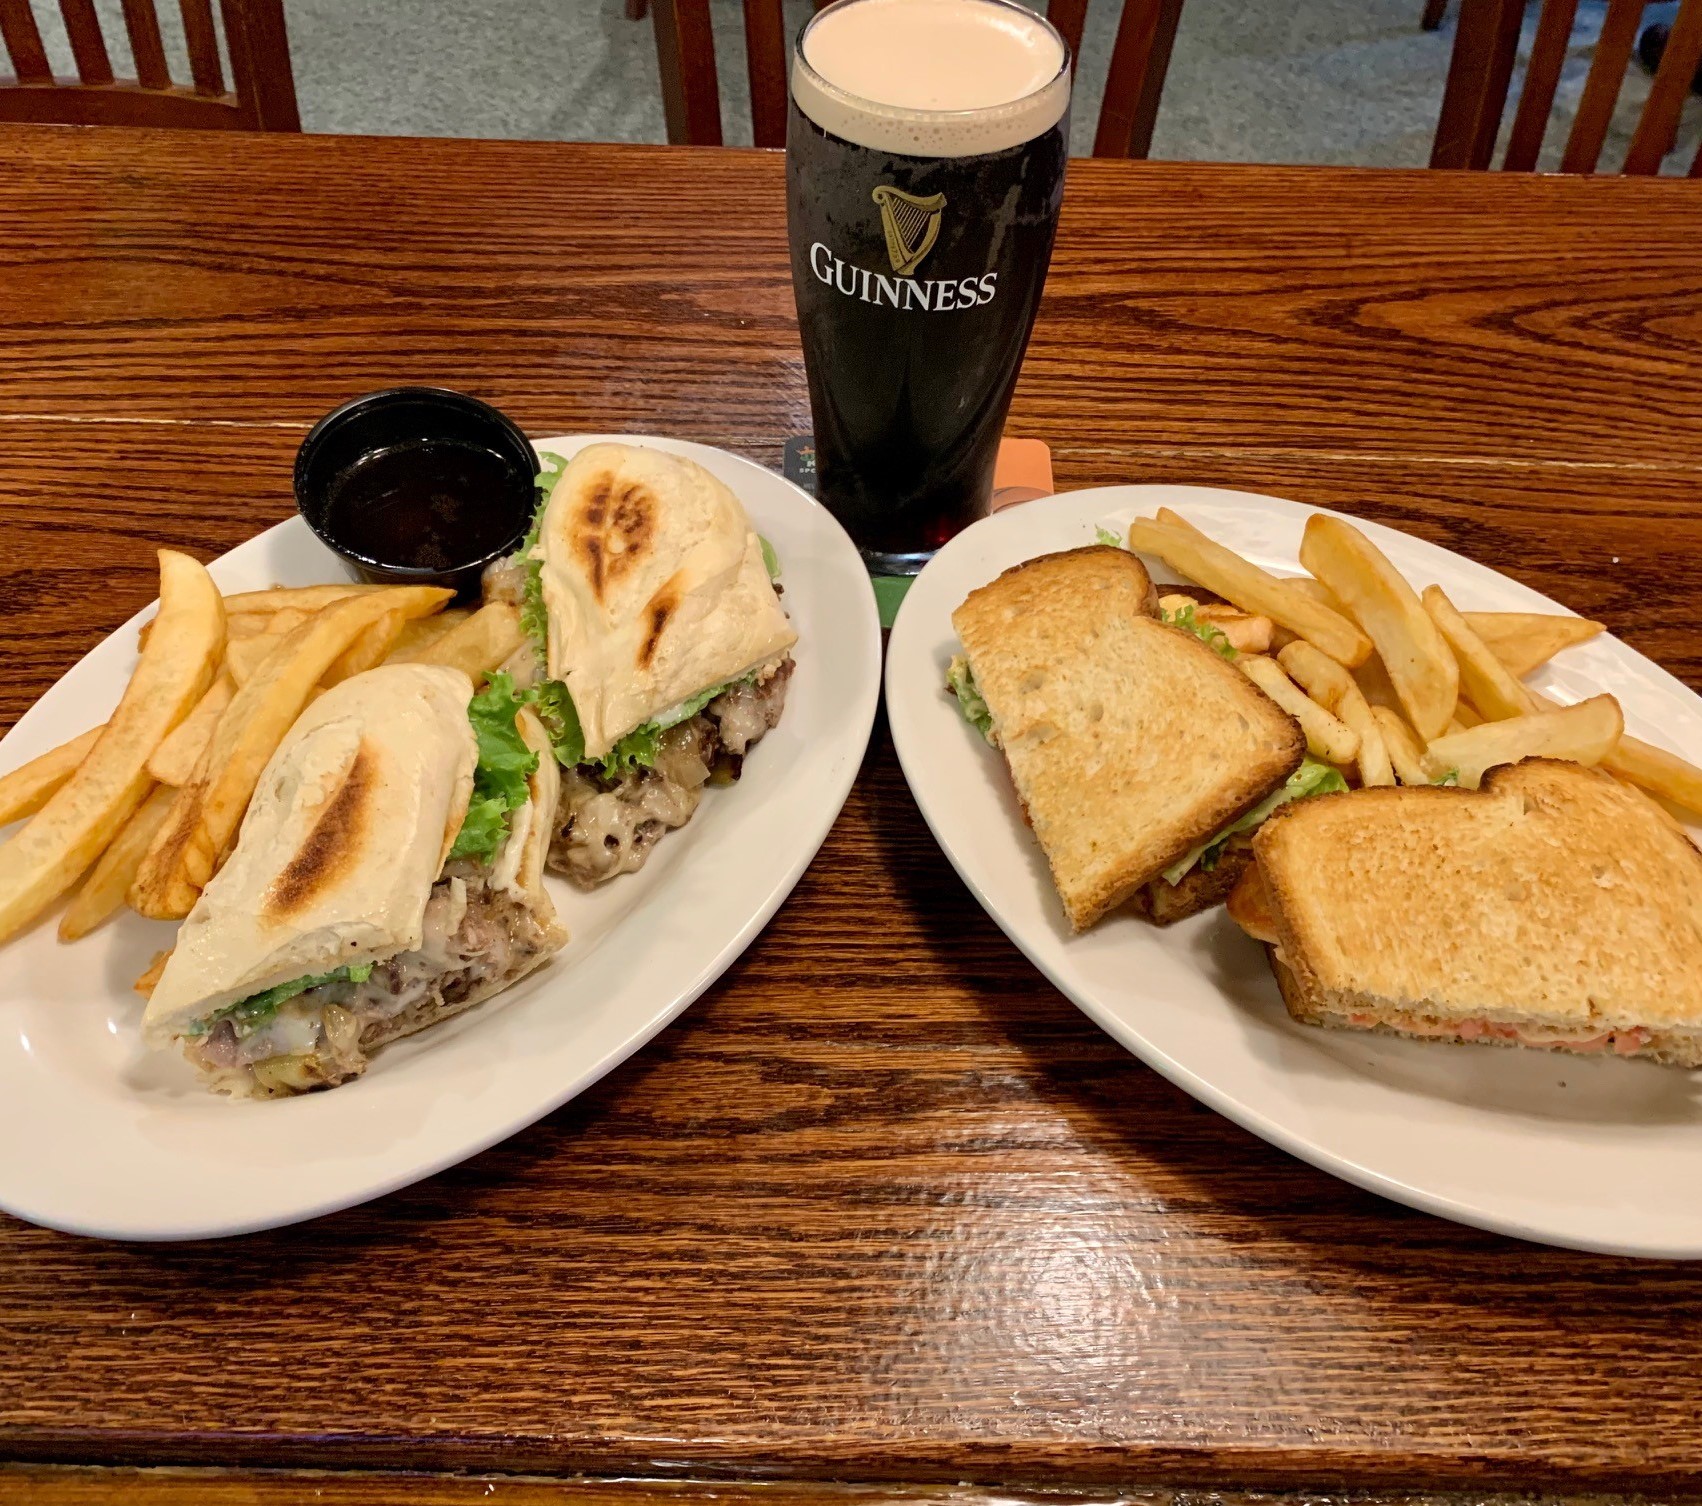 a ribeye cheesesteak sandwich with fries, a next door salmon BLT with fries, and a glass of Guinness